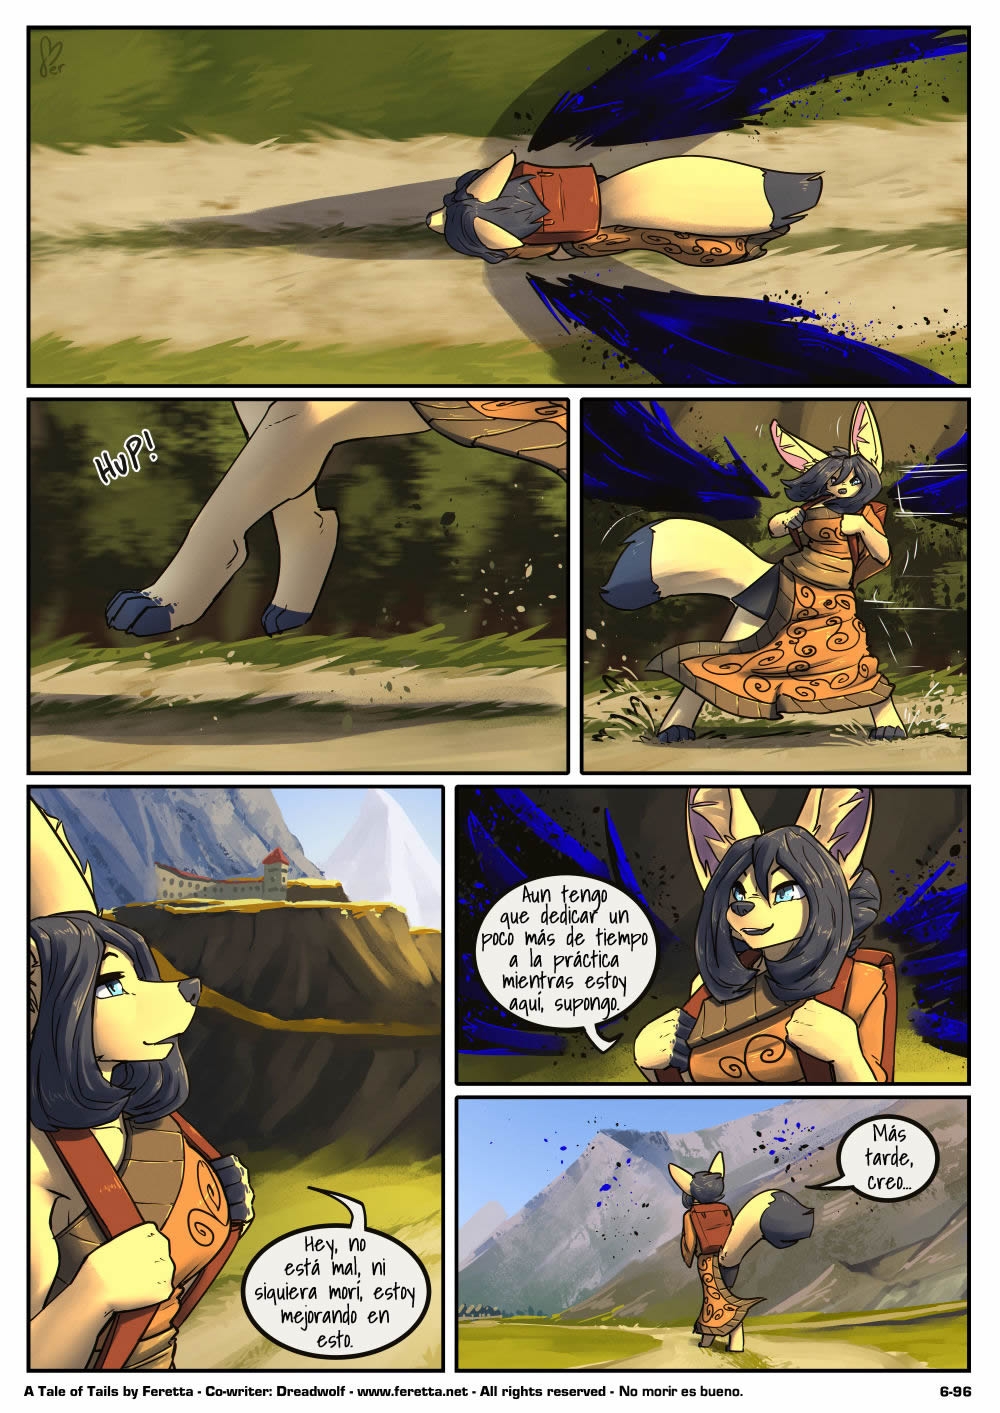 [Feretta] A Tale of Tails: Chapter 6 - Paths converge / Los caminos convergen [Spanish] [Red Fox Makkan] 96